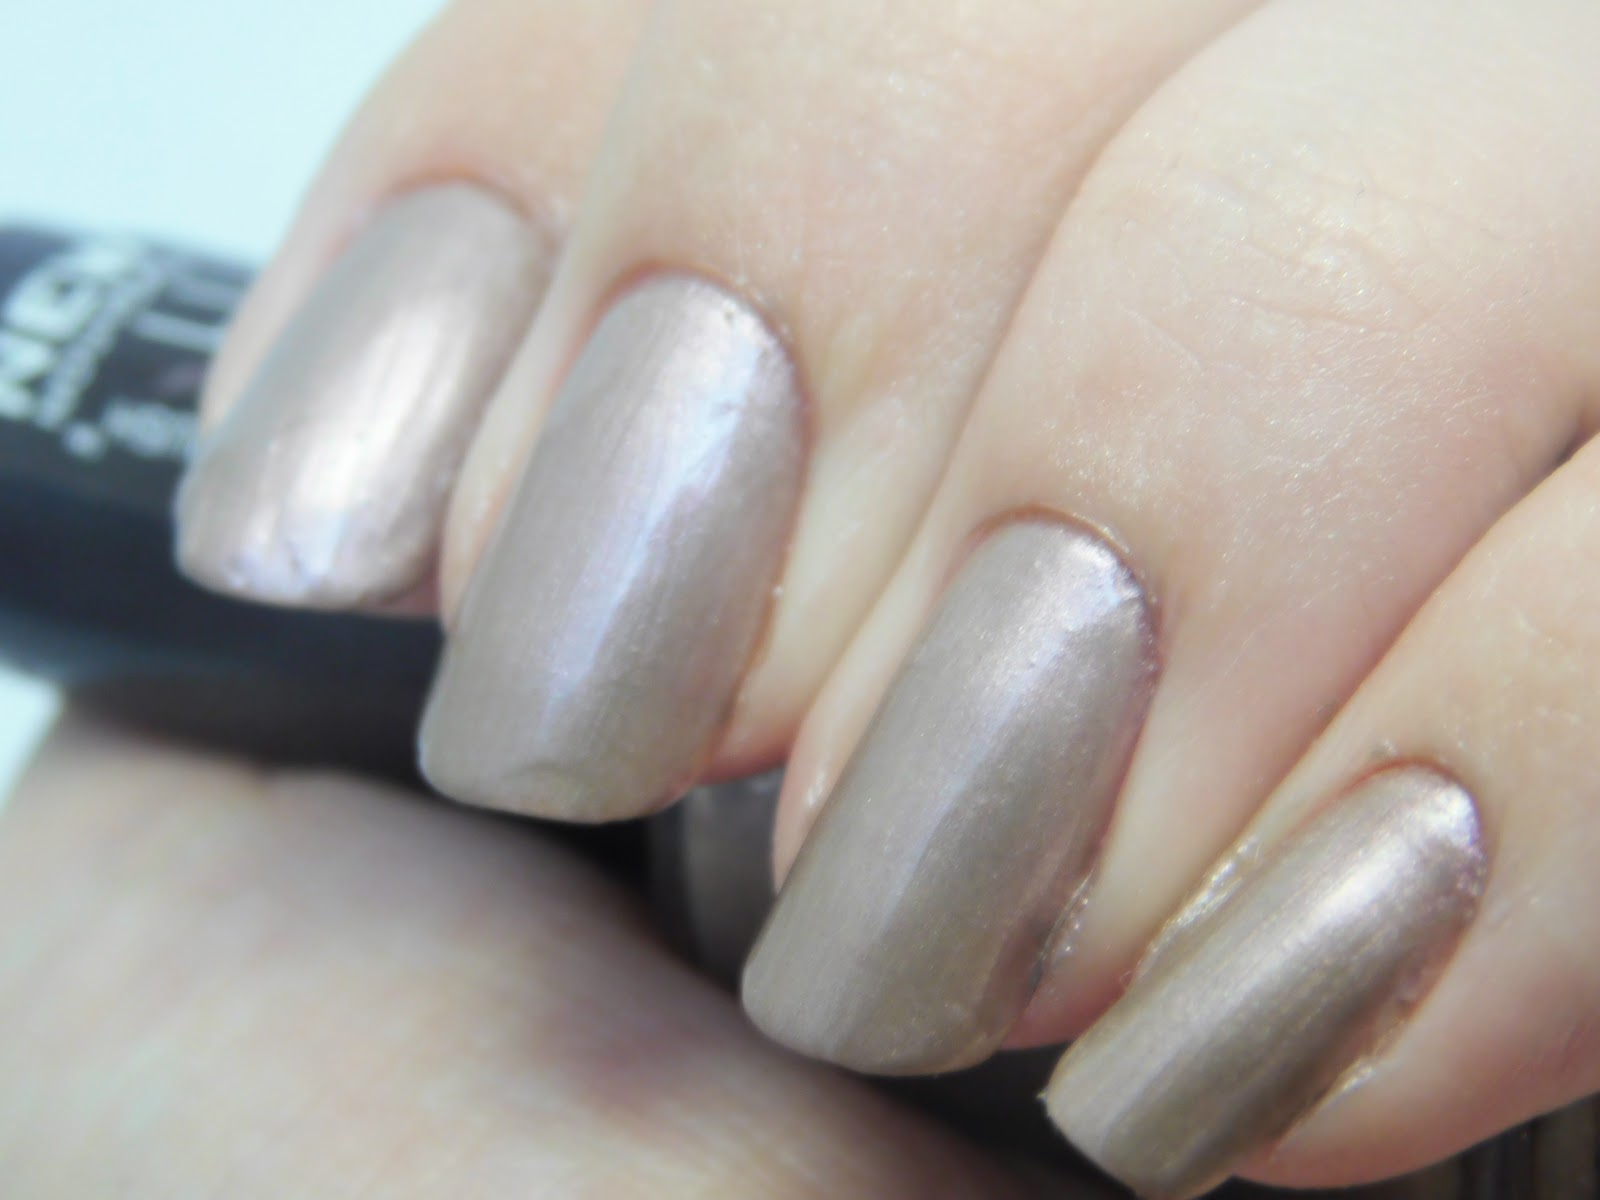 10. "Antique Taupe" nail polish color - wide 5